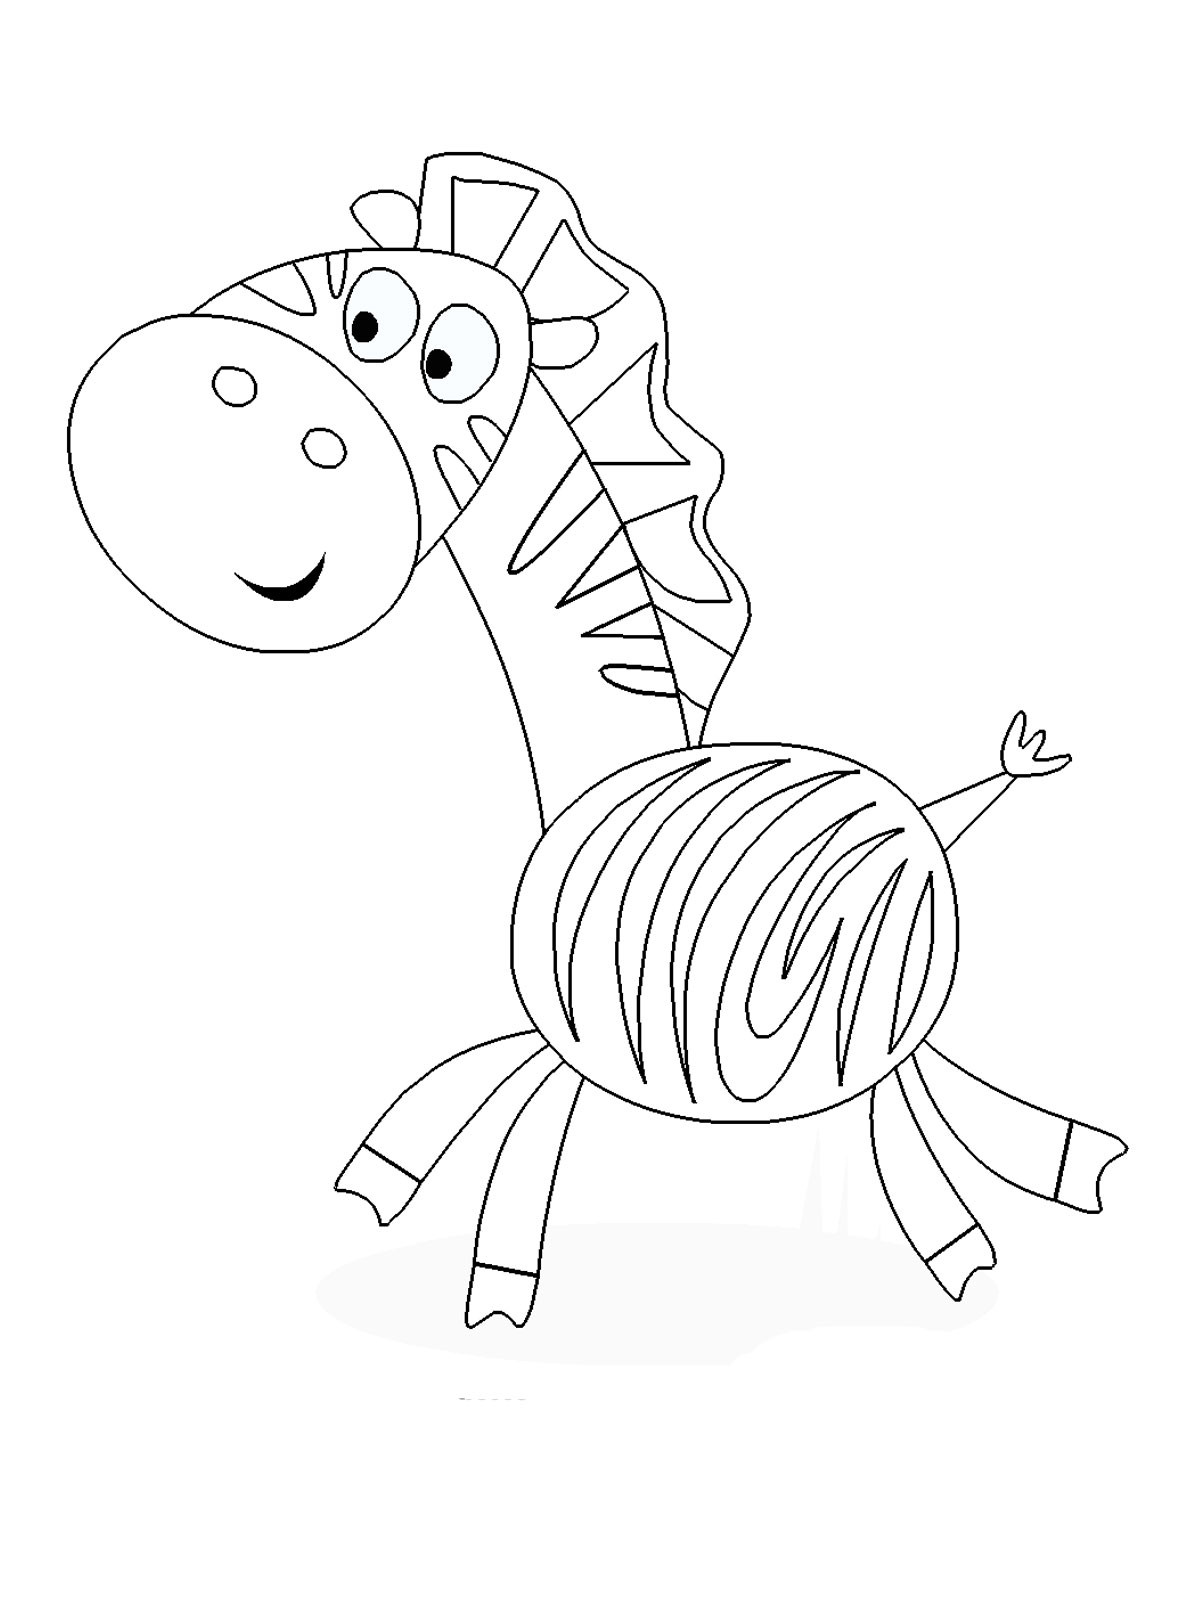 Coloring Sheets Kids
 Printable coloring pages for kids